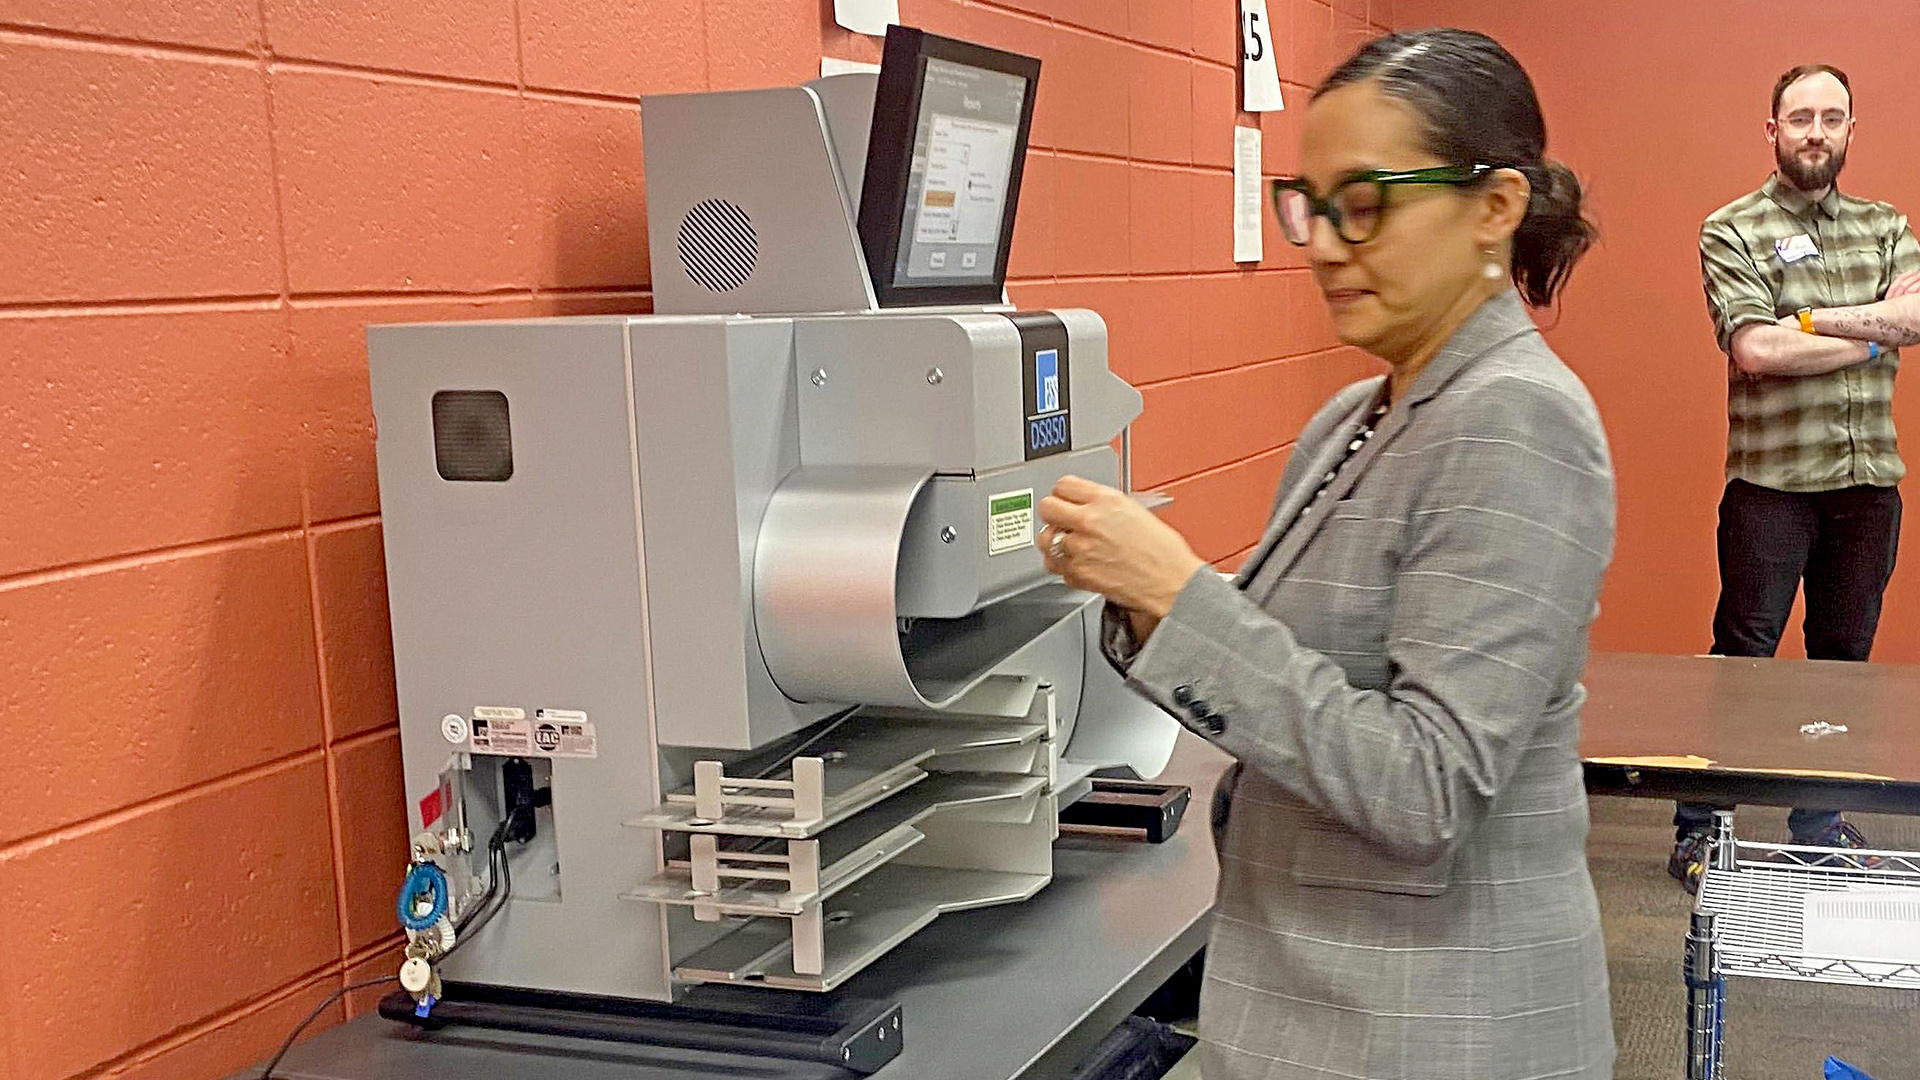 Paulina Gutierrez stands in front of a ballot tabulator machine placed on top a table, with another person standing in the background with crossed arms and wearing a disposable nametag, in a room with painted concrete block walls.